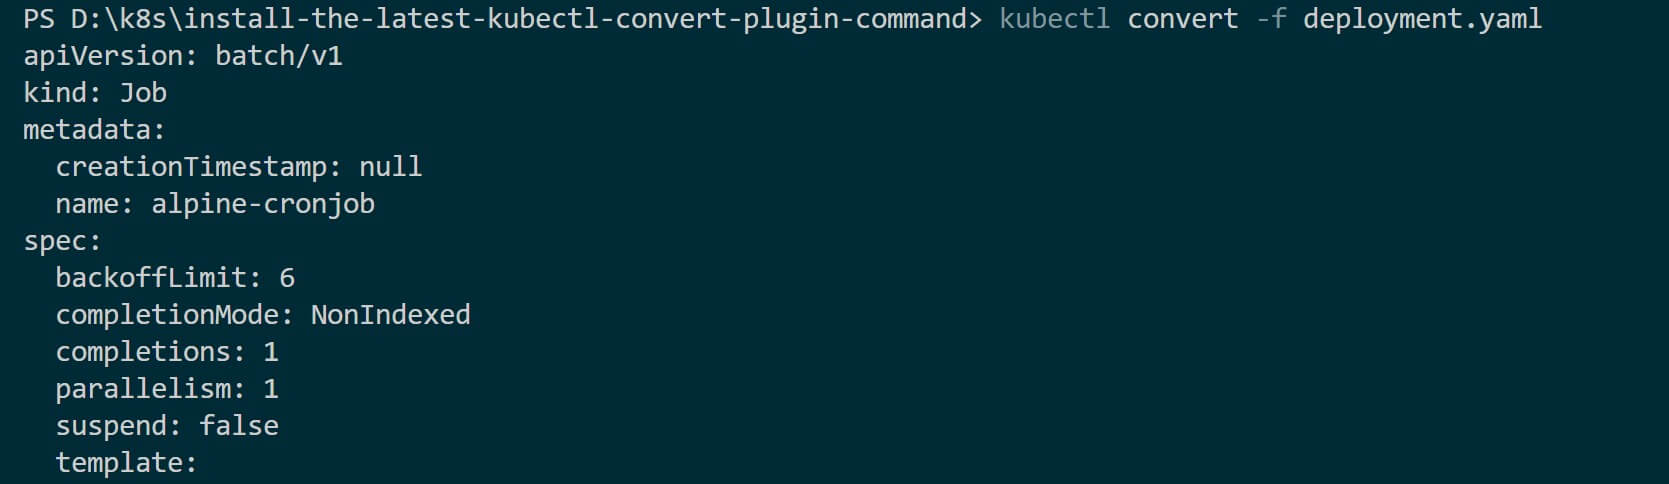 Install and Use the Latest Kubectl Convert Plugin